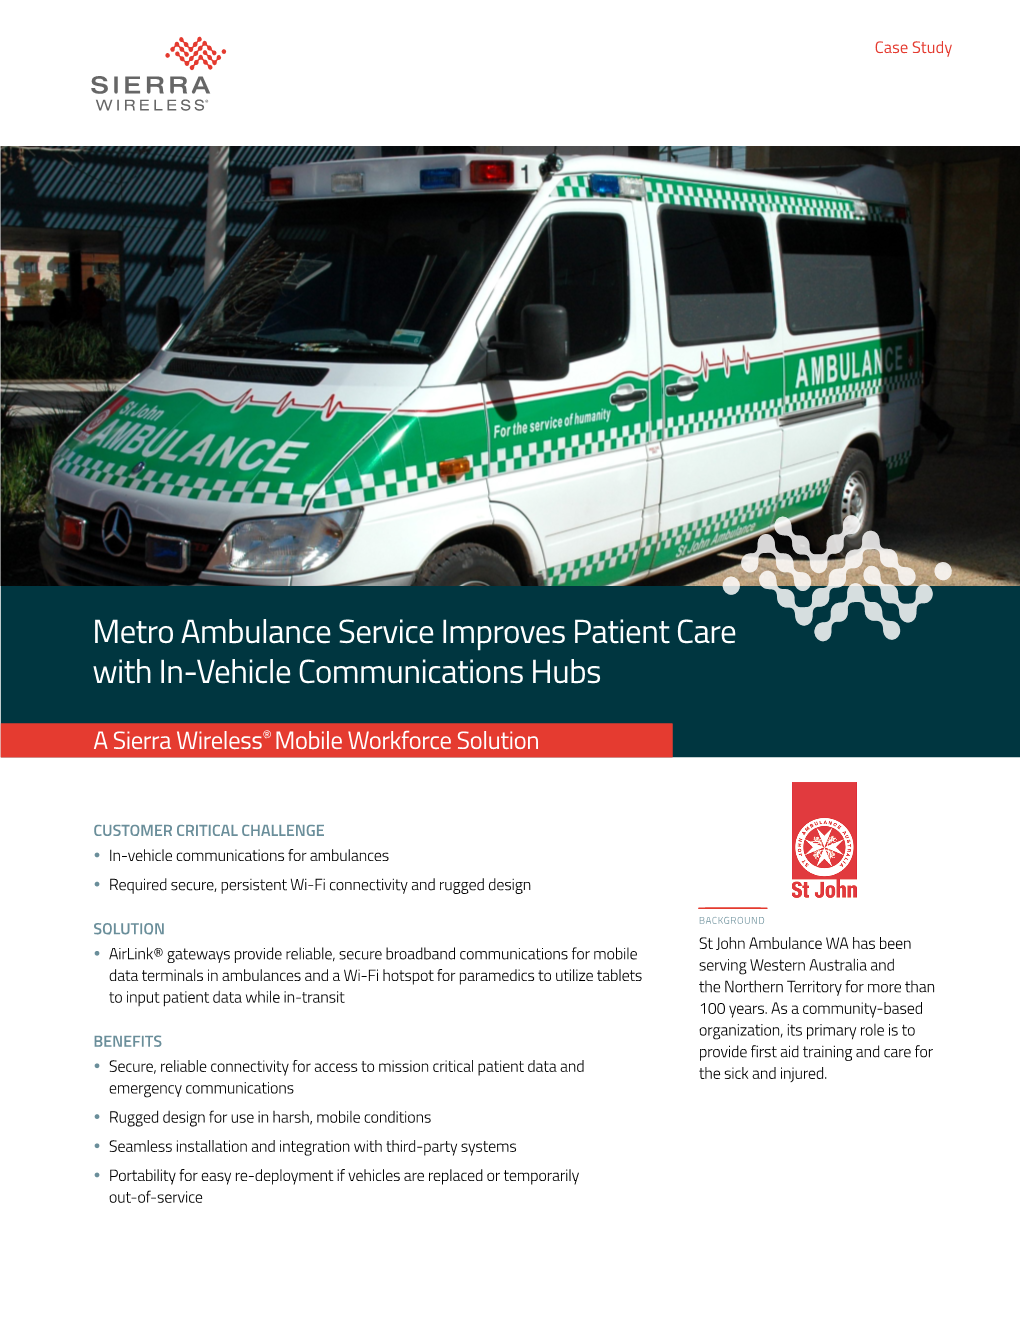 Metro Ambulance Service Improves Patient Care with In-Vehicle Communications Hubs